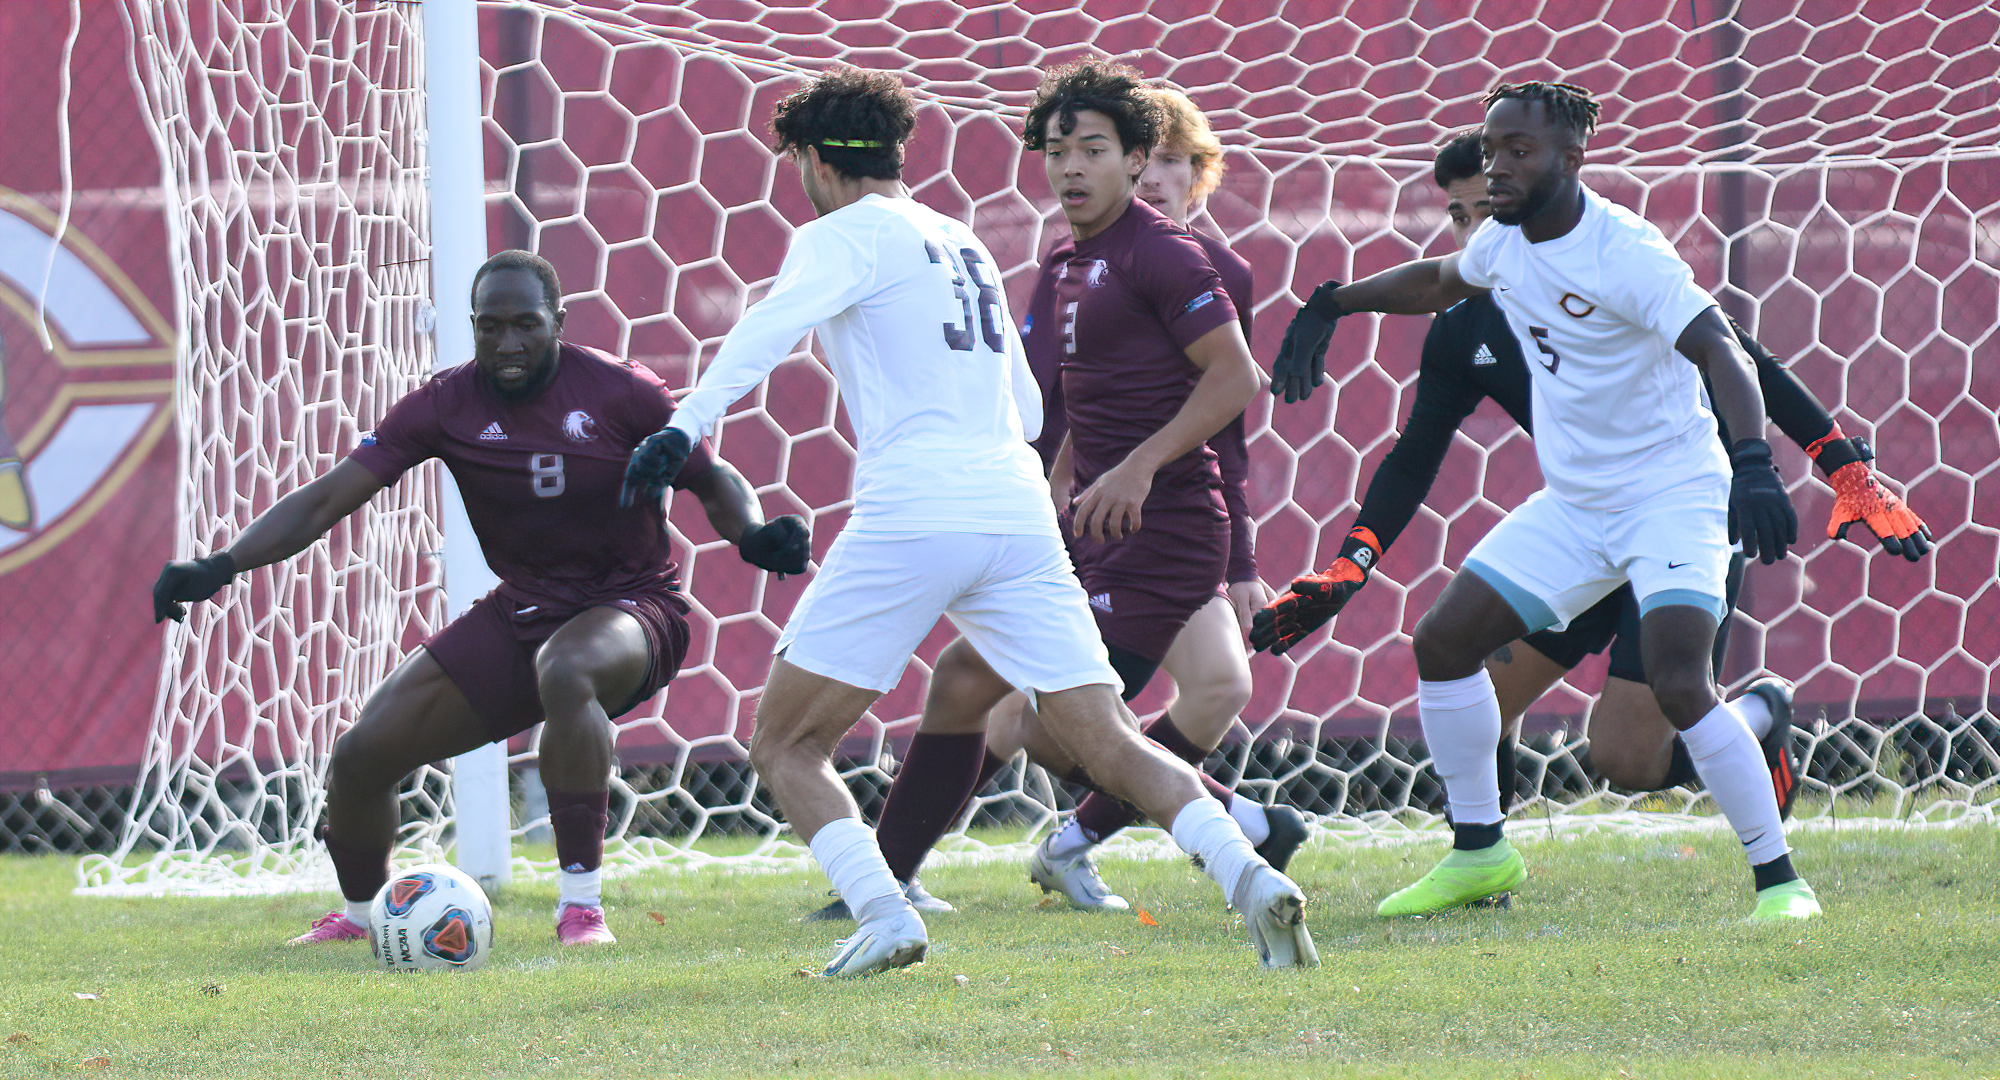 Freshman Yousif Alshihmani (#38) gets ready to shoot in the first half of the Cobbers' 2-1 vs. Augsburg. Alshihmani' shot gave CC a 1-0 lead.